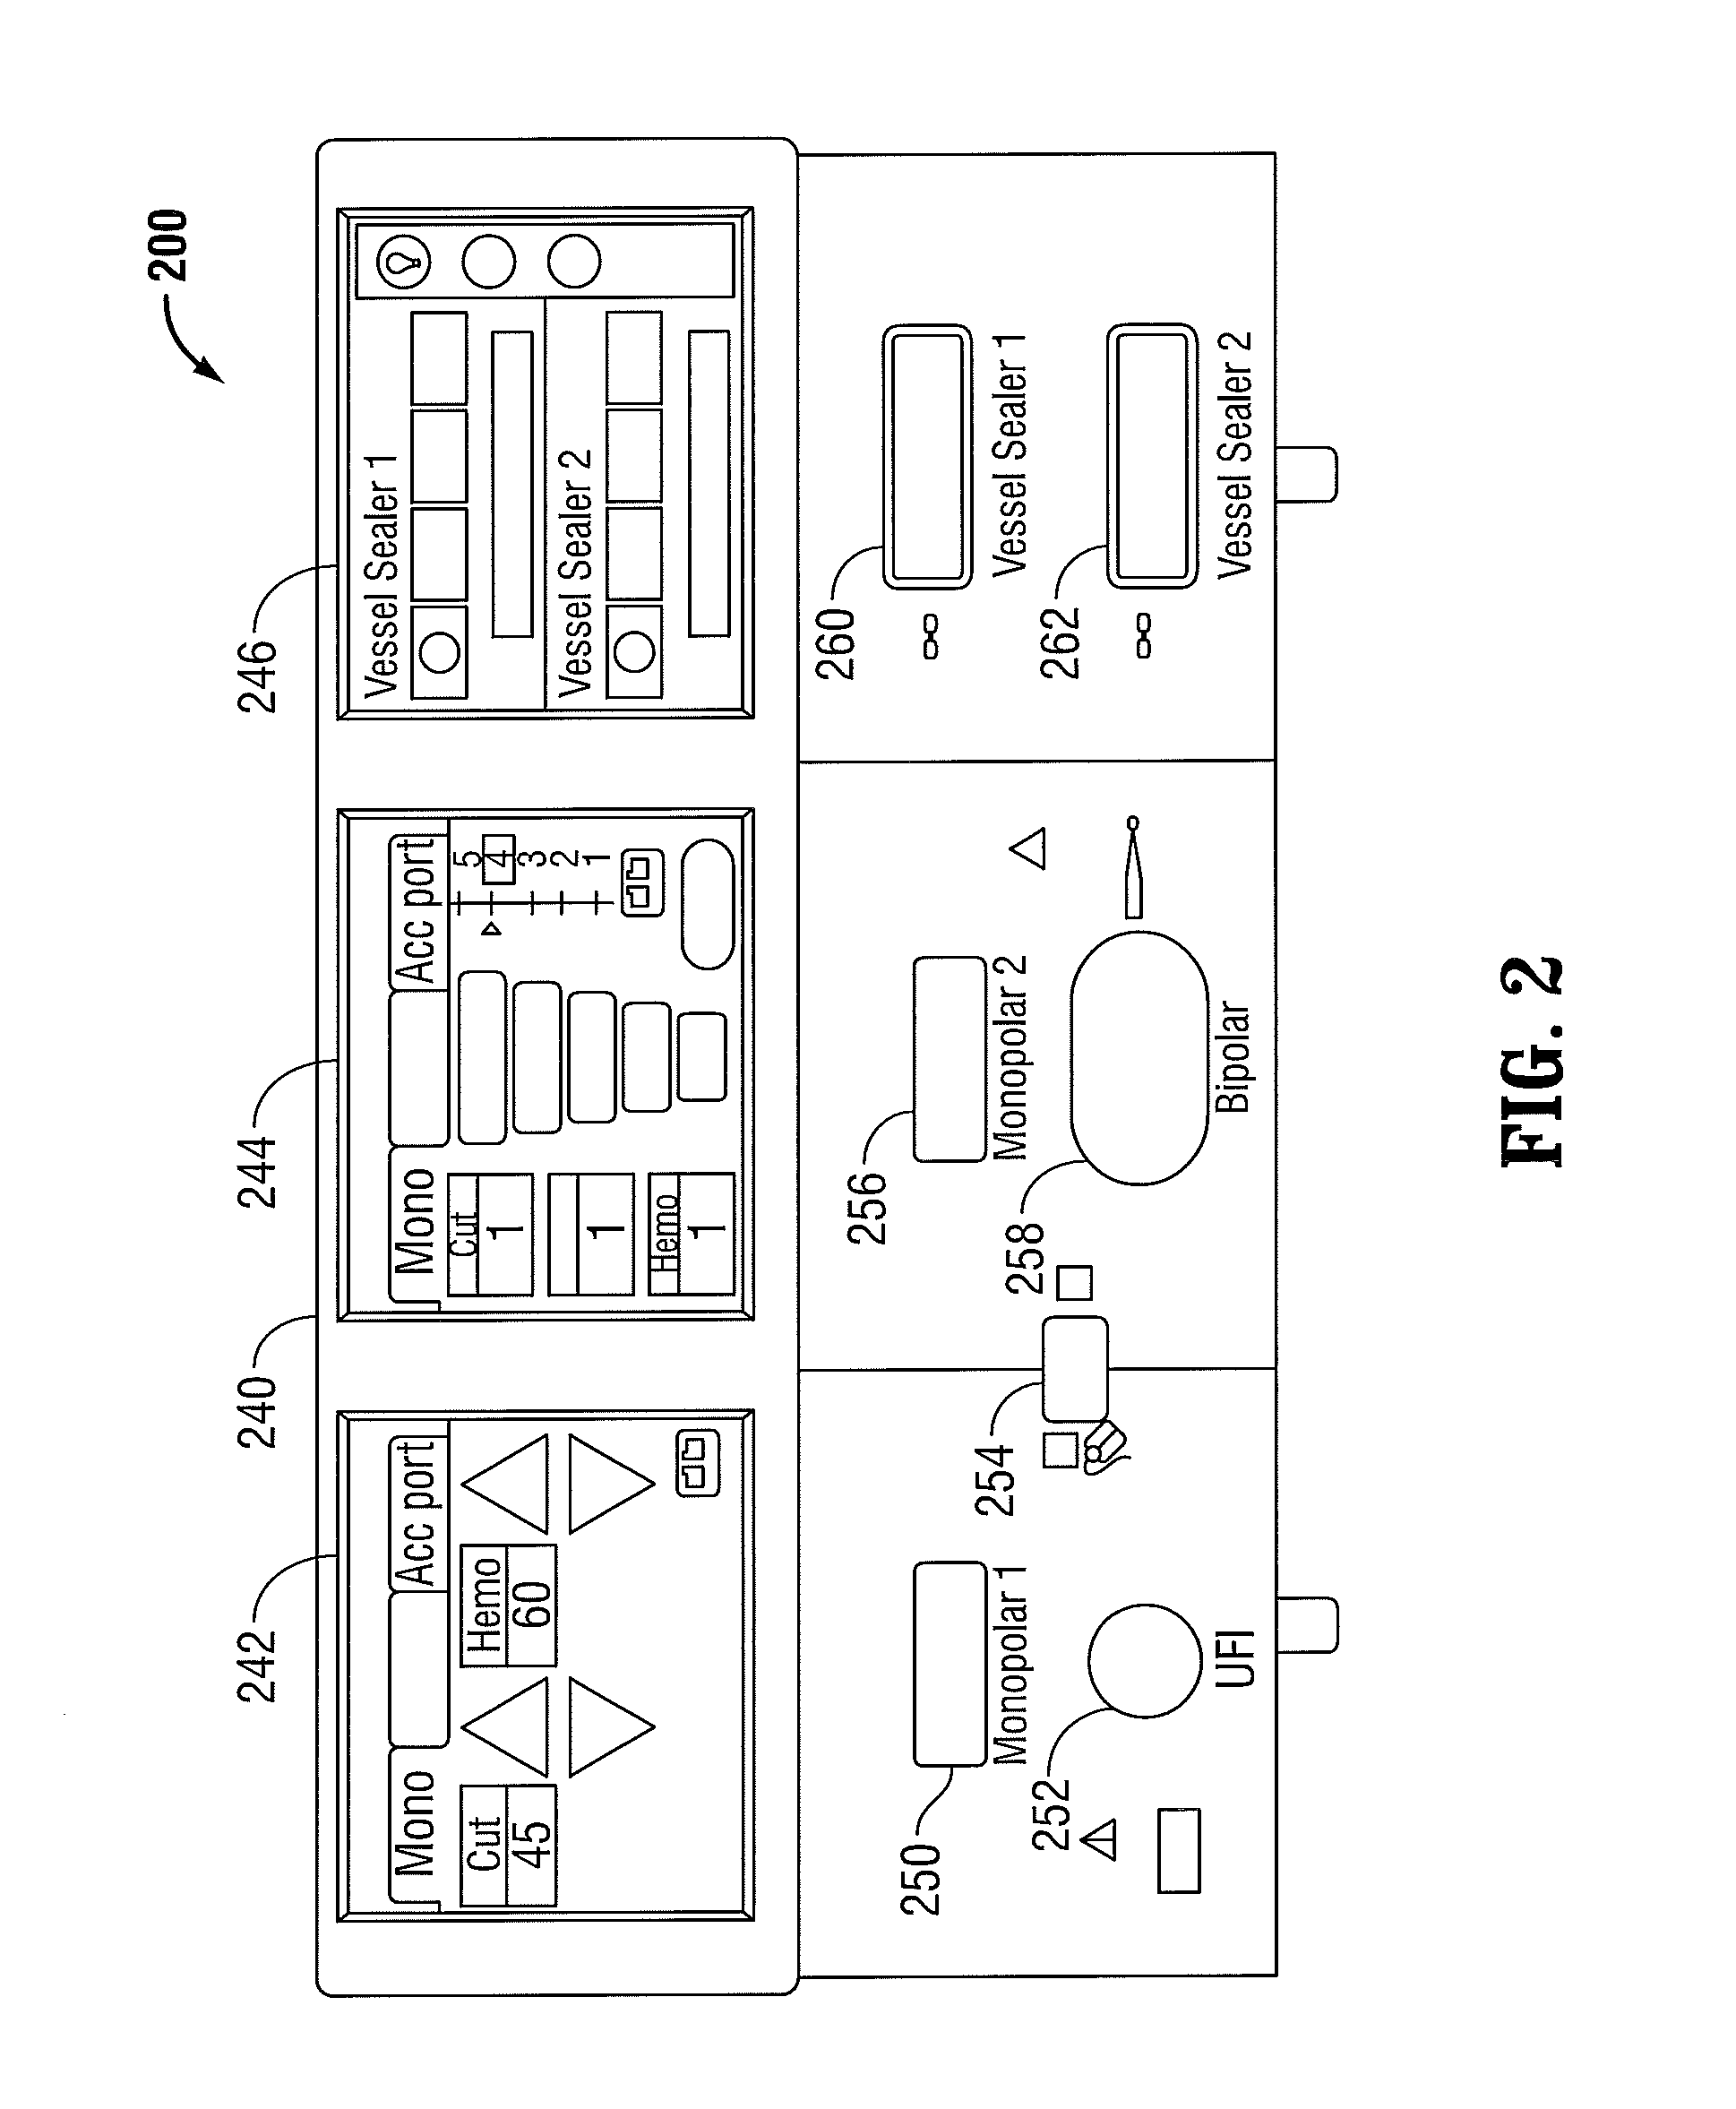 System and method for voltage and current sensing